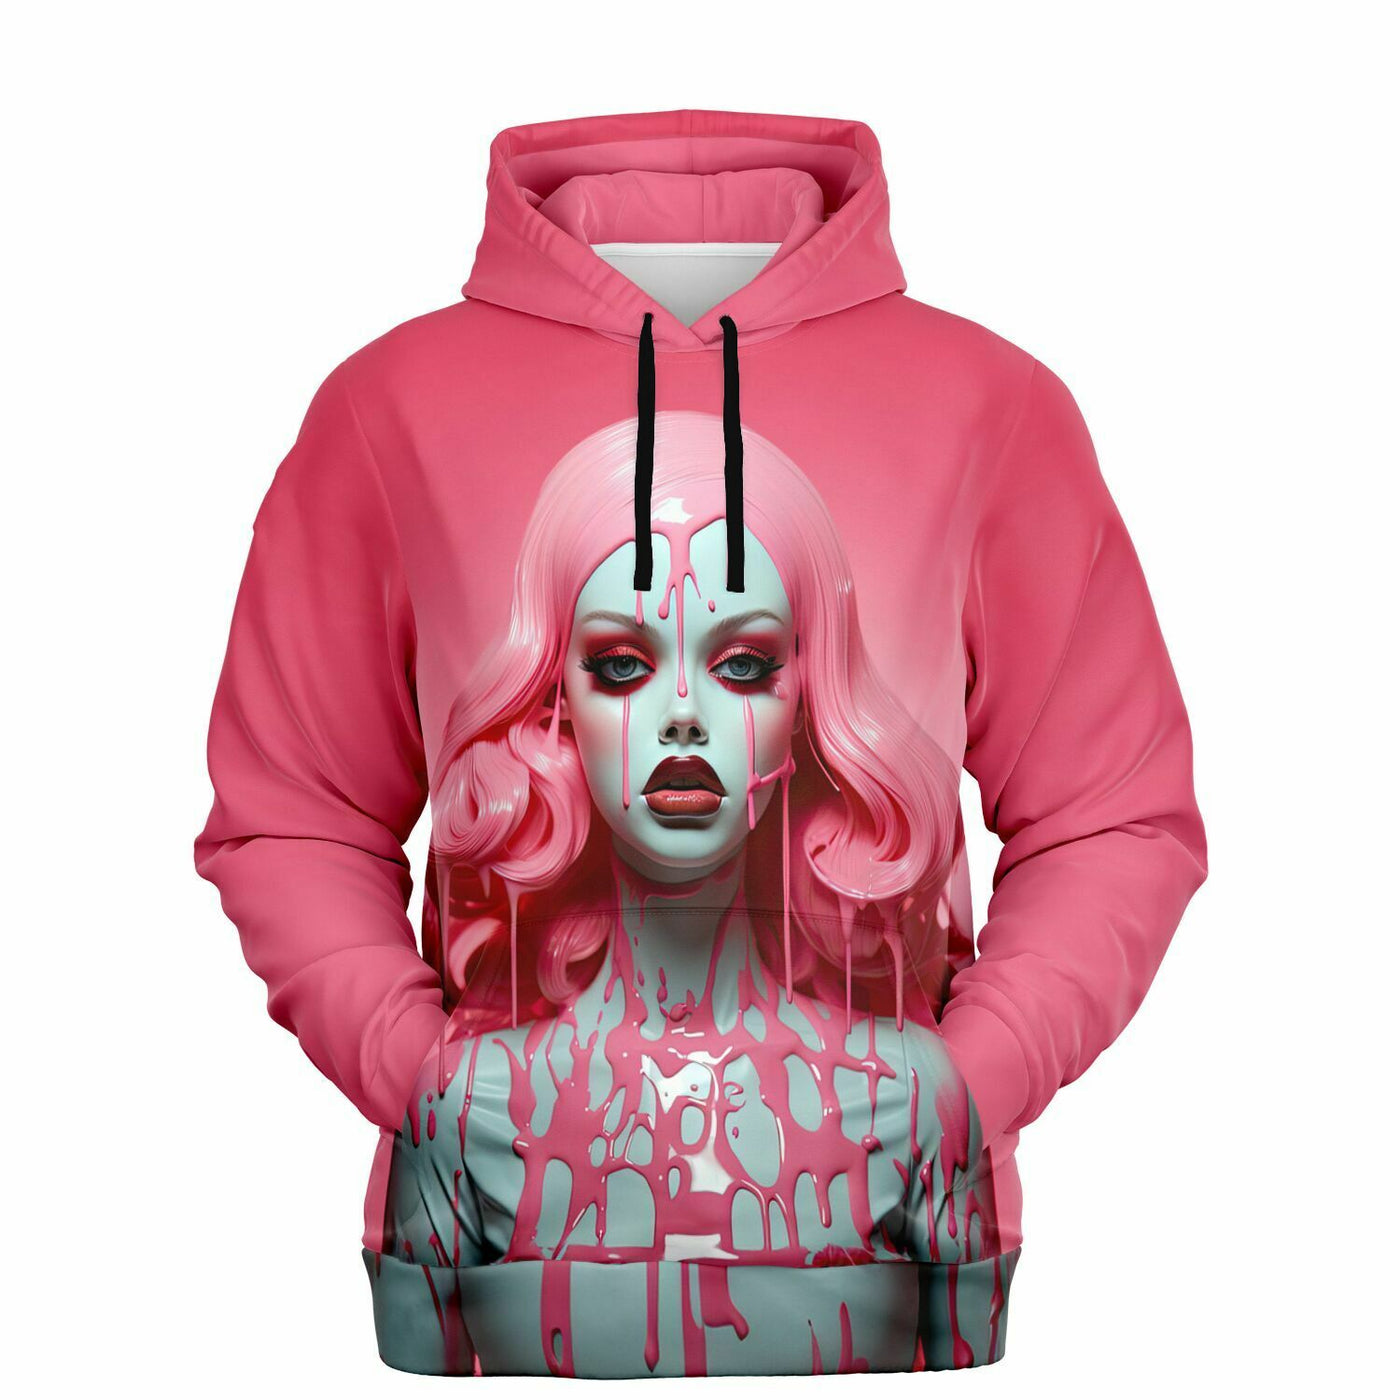 Scary Melting Doll Pop Surreal Fashion Hoodie